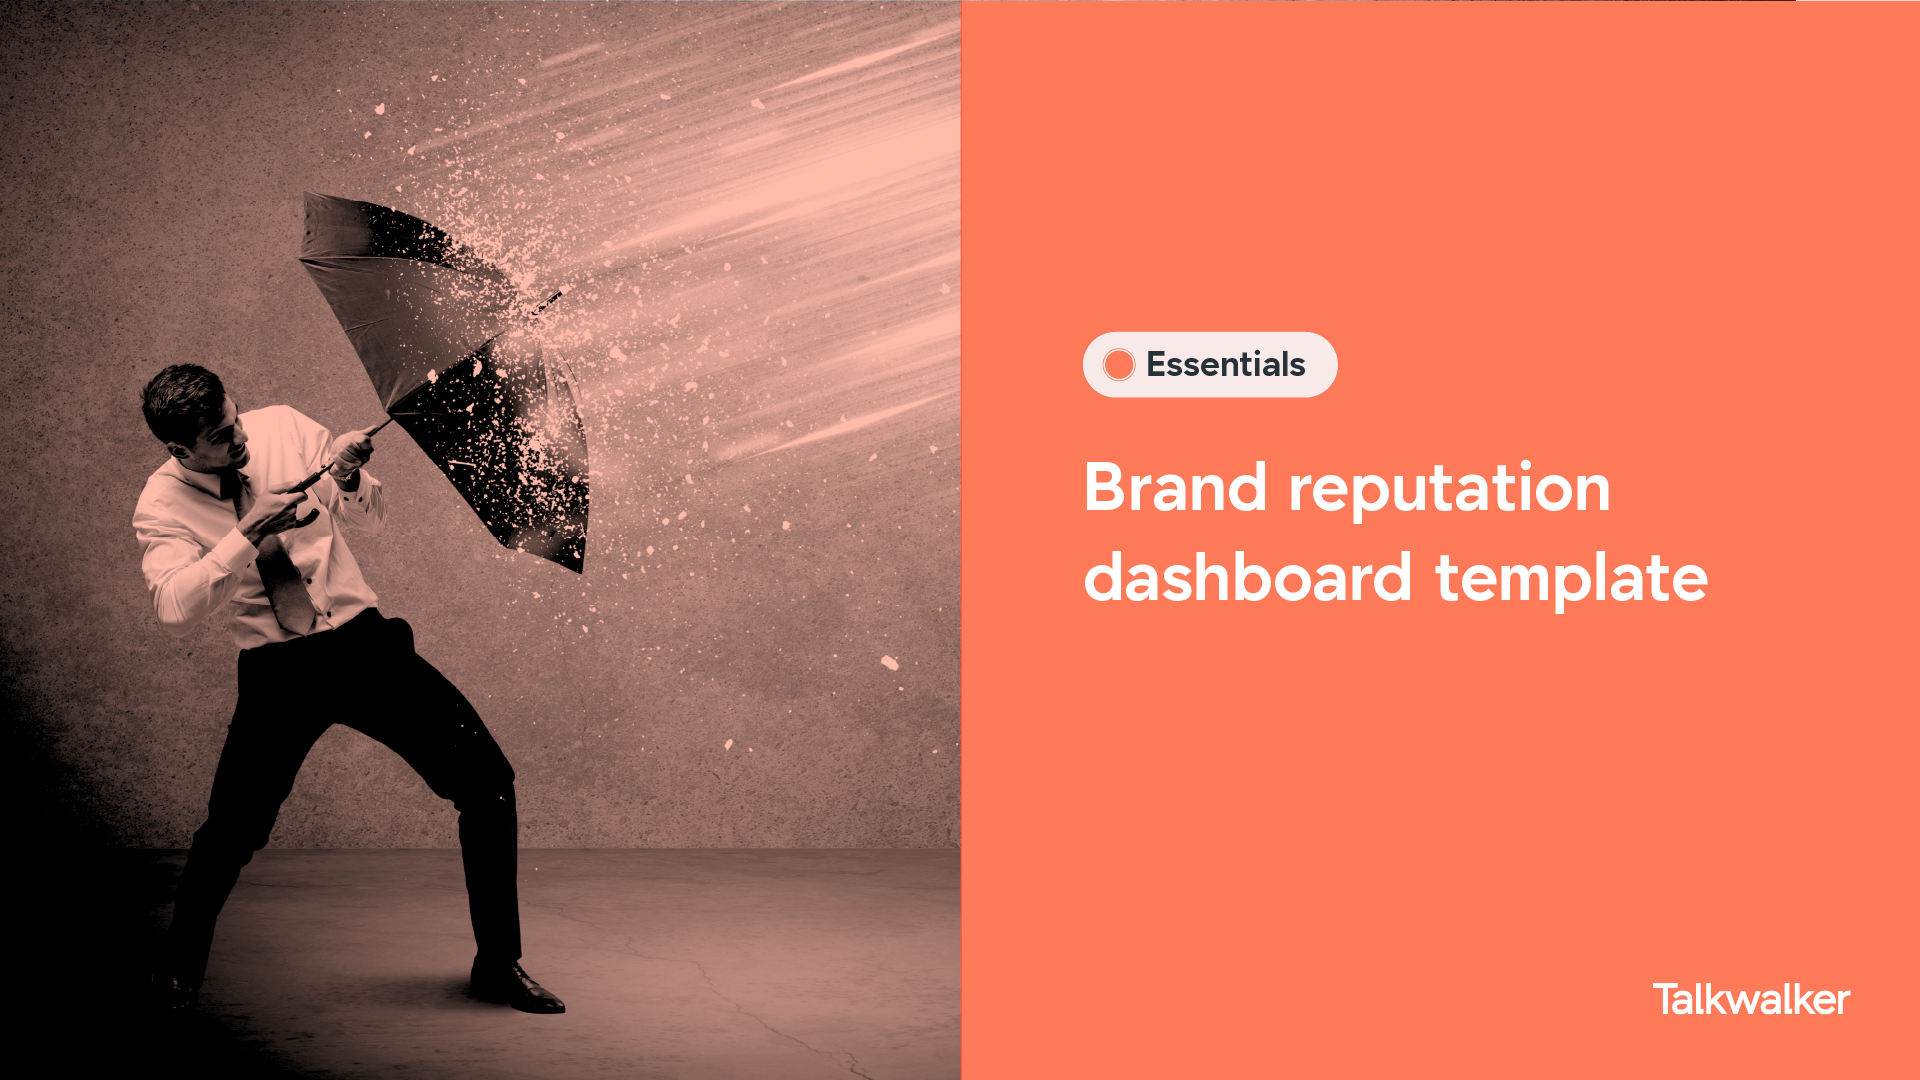 Brand reputation dashboard template illustrated with a man holding an umbrella, protecting himself against powerful rain.